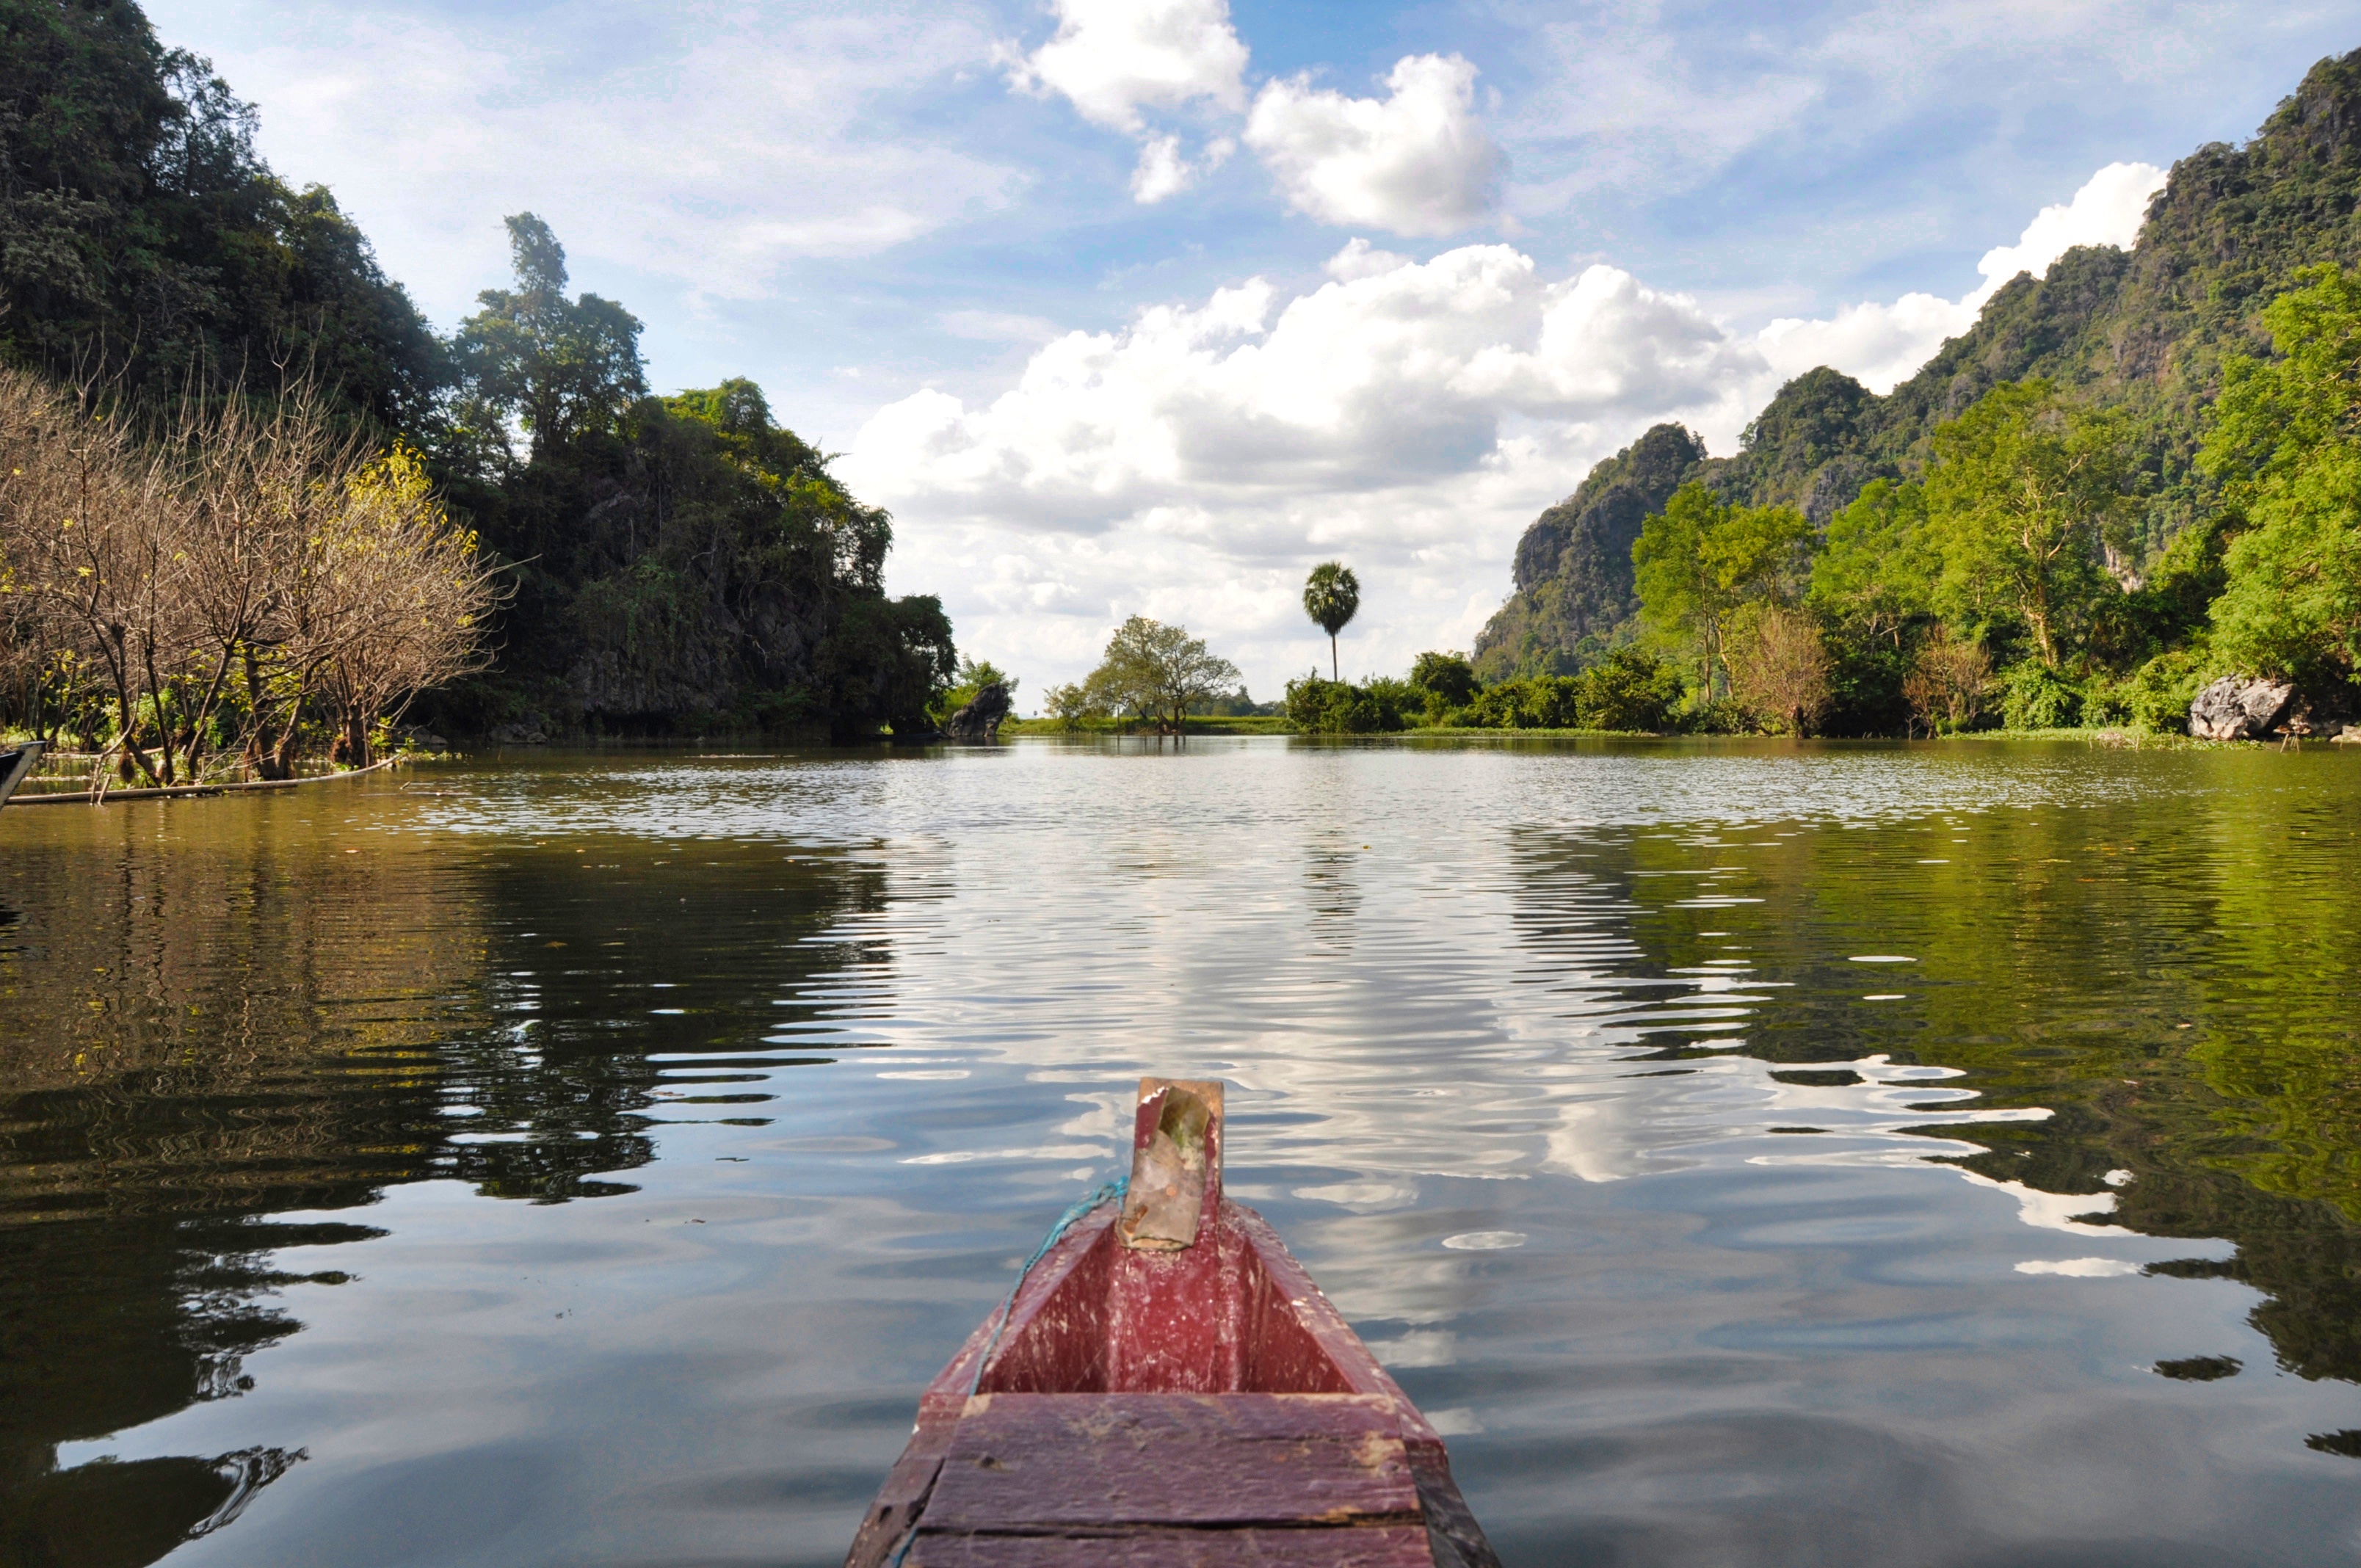 Two Travel The World - Hpa An - Saddan cave